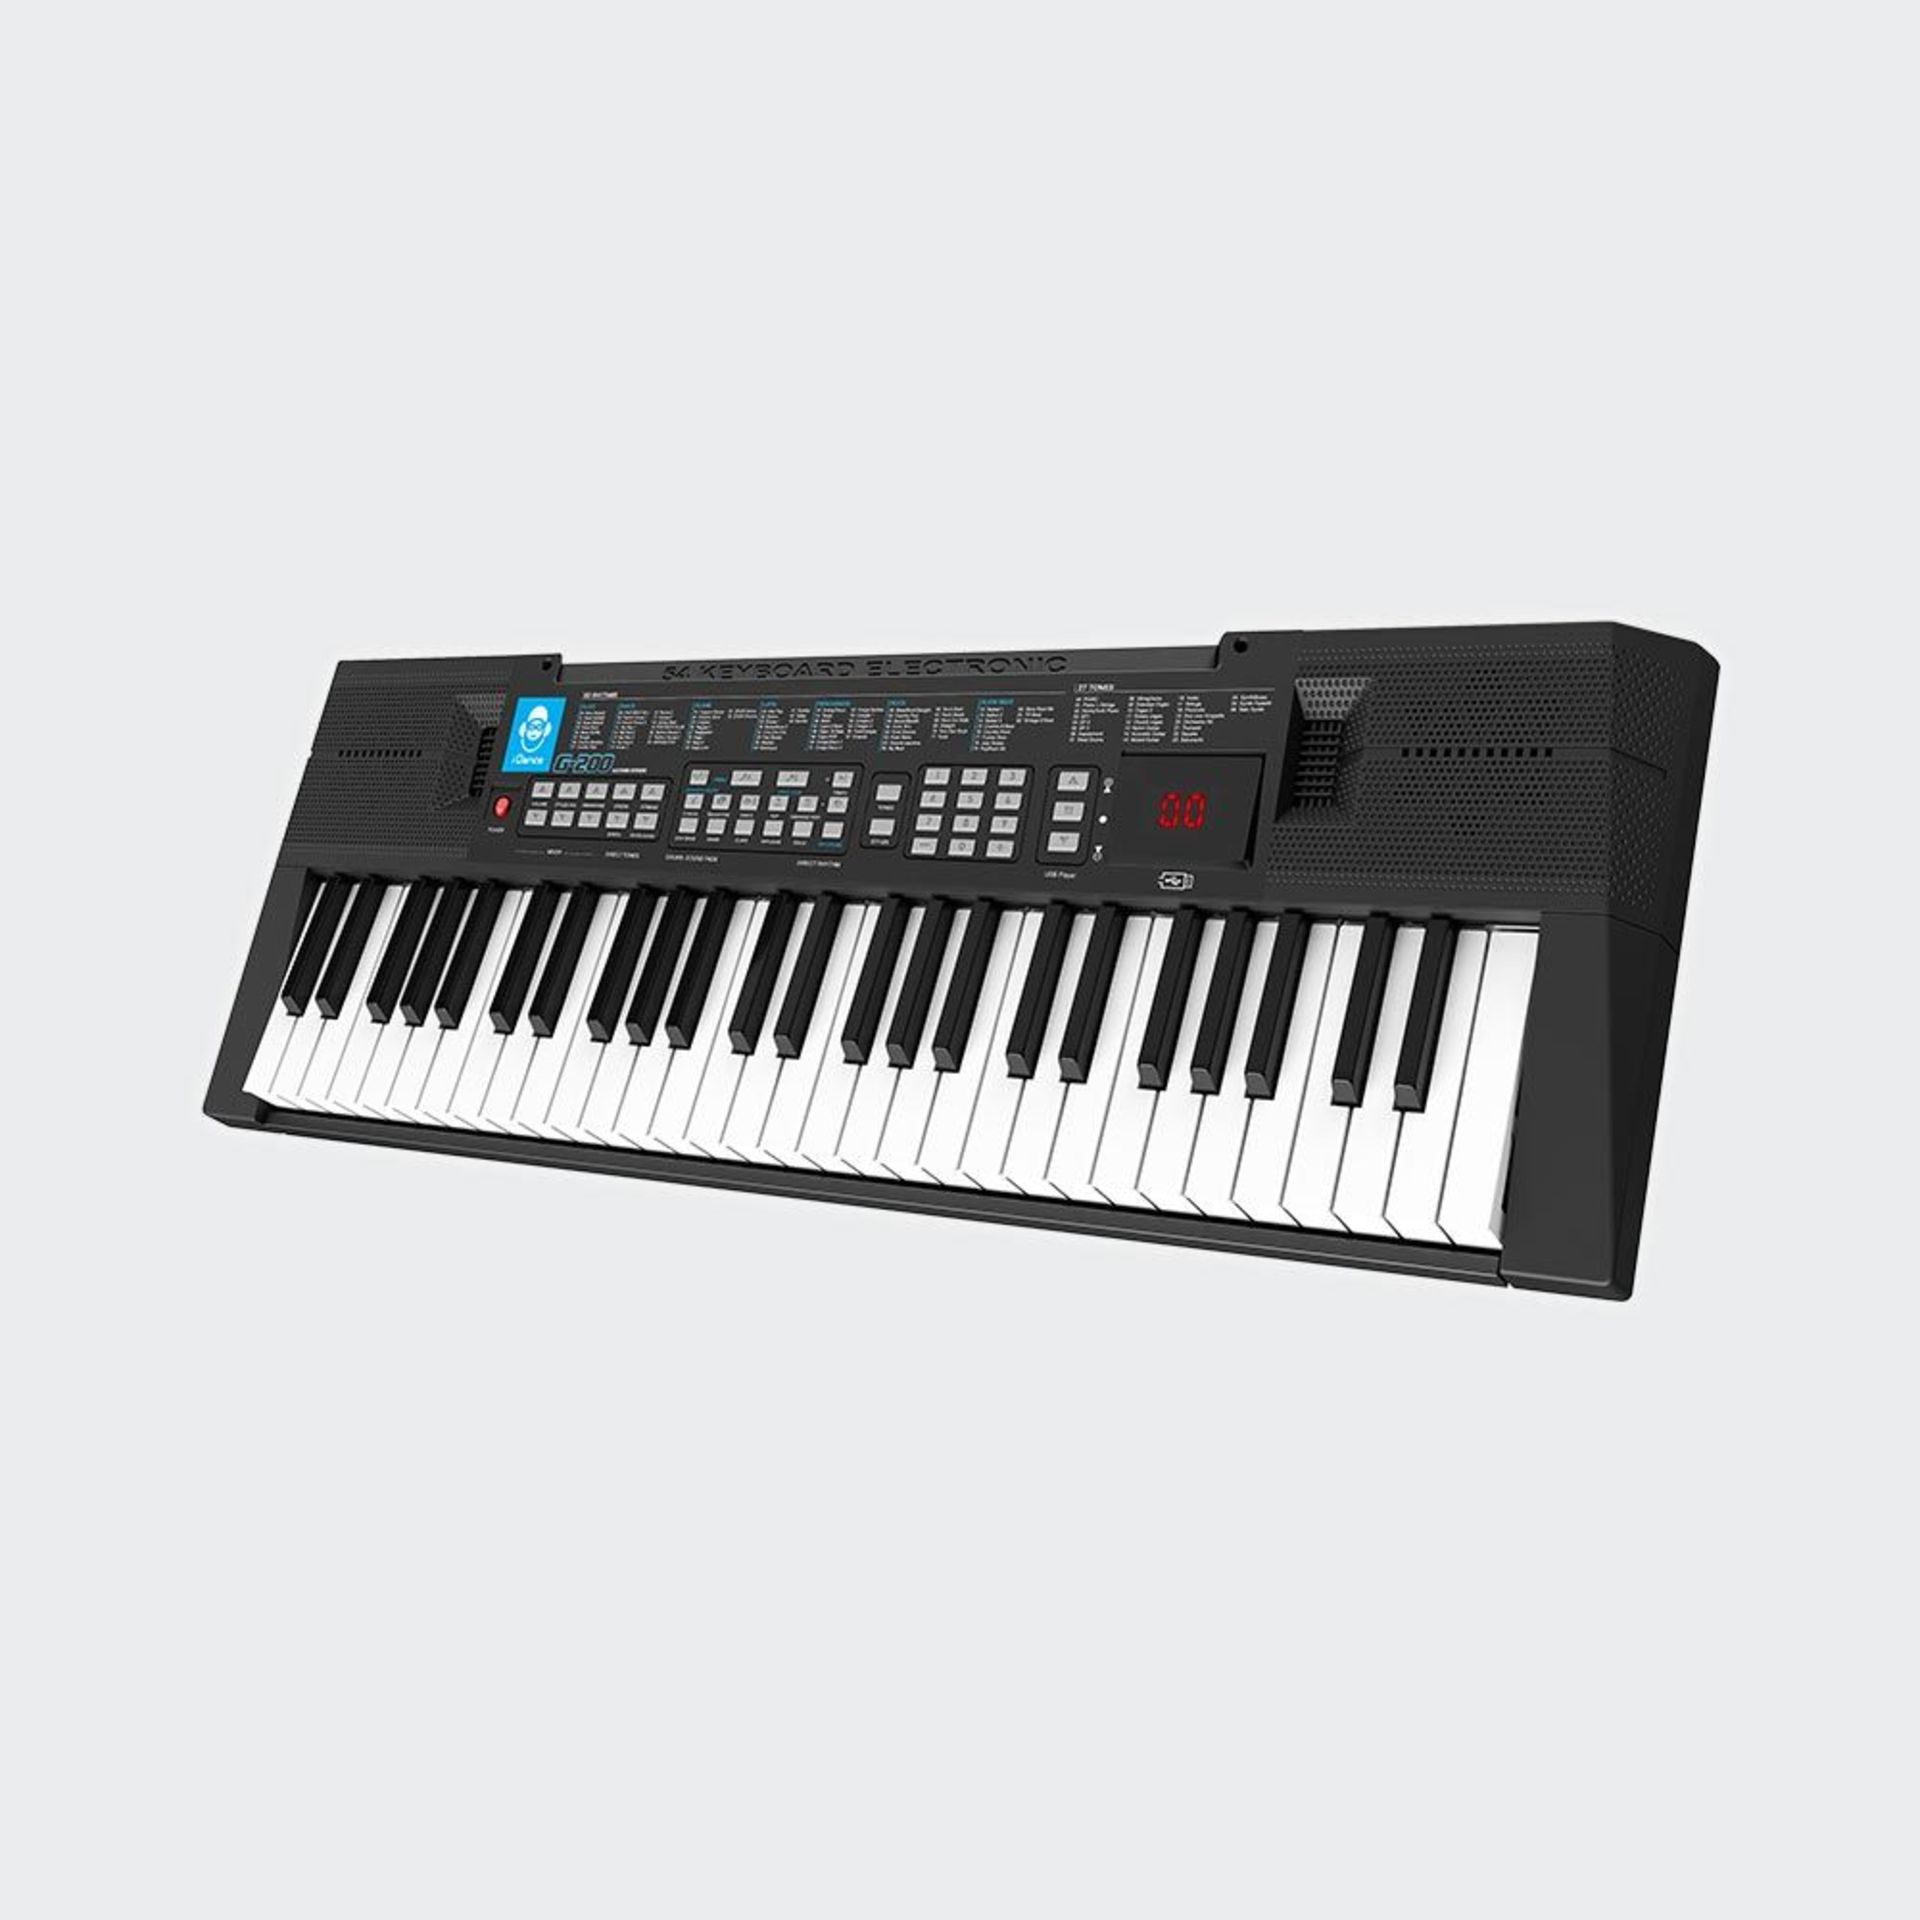 (R8) Lot RRP £118. 2x iDance G-200 Electronic Keyboard RRP £59 Each. ( Units Have Return To Manufac